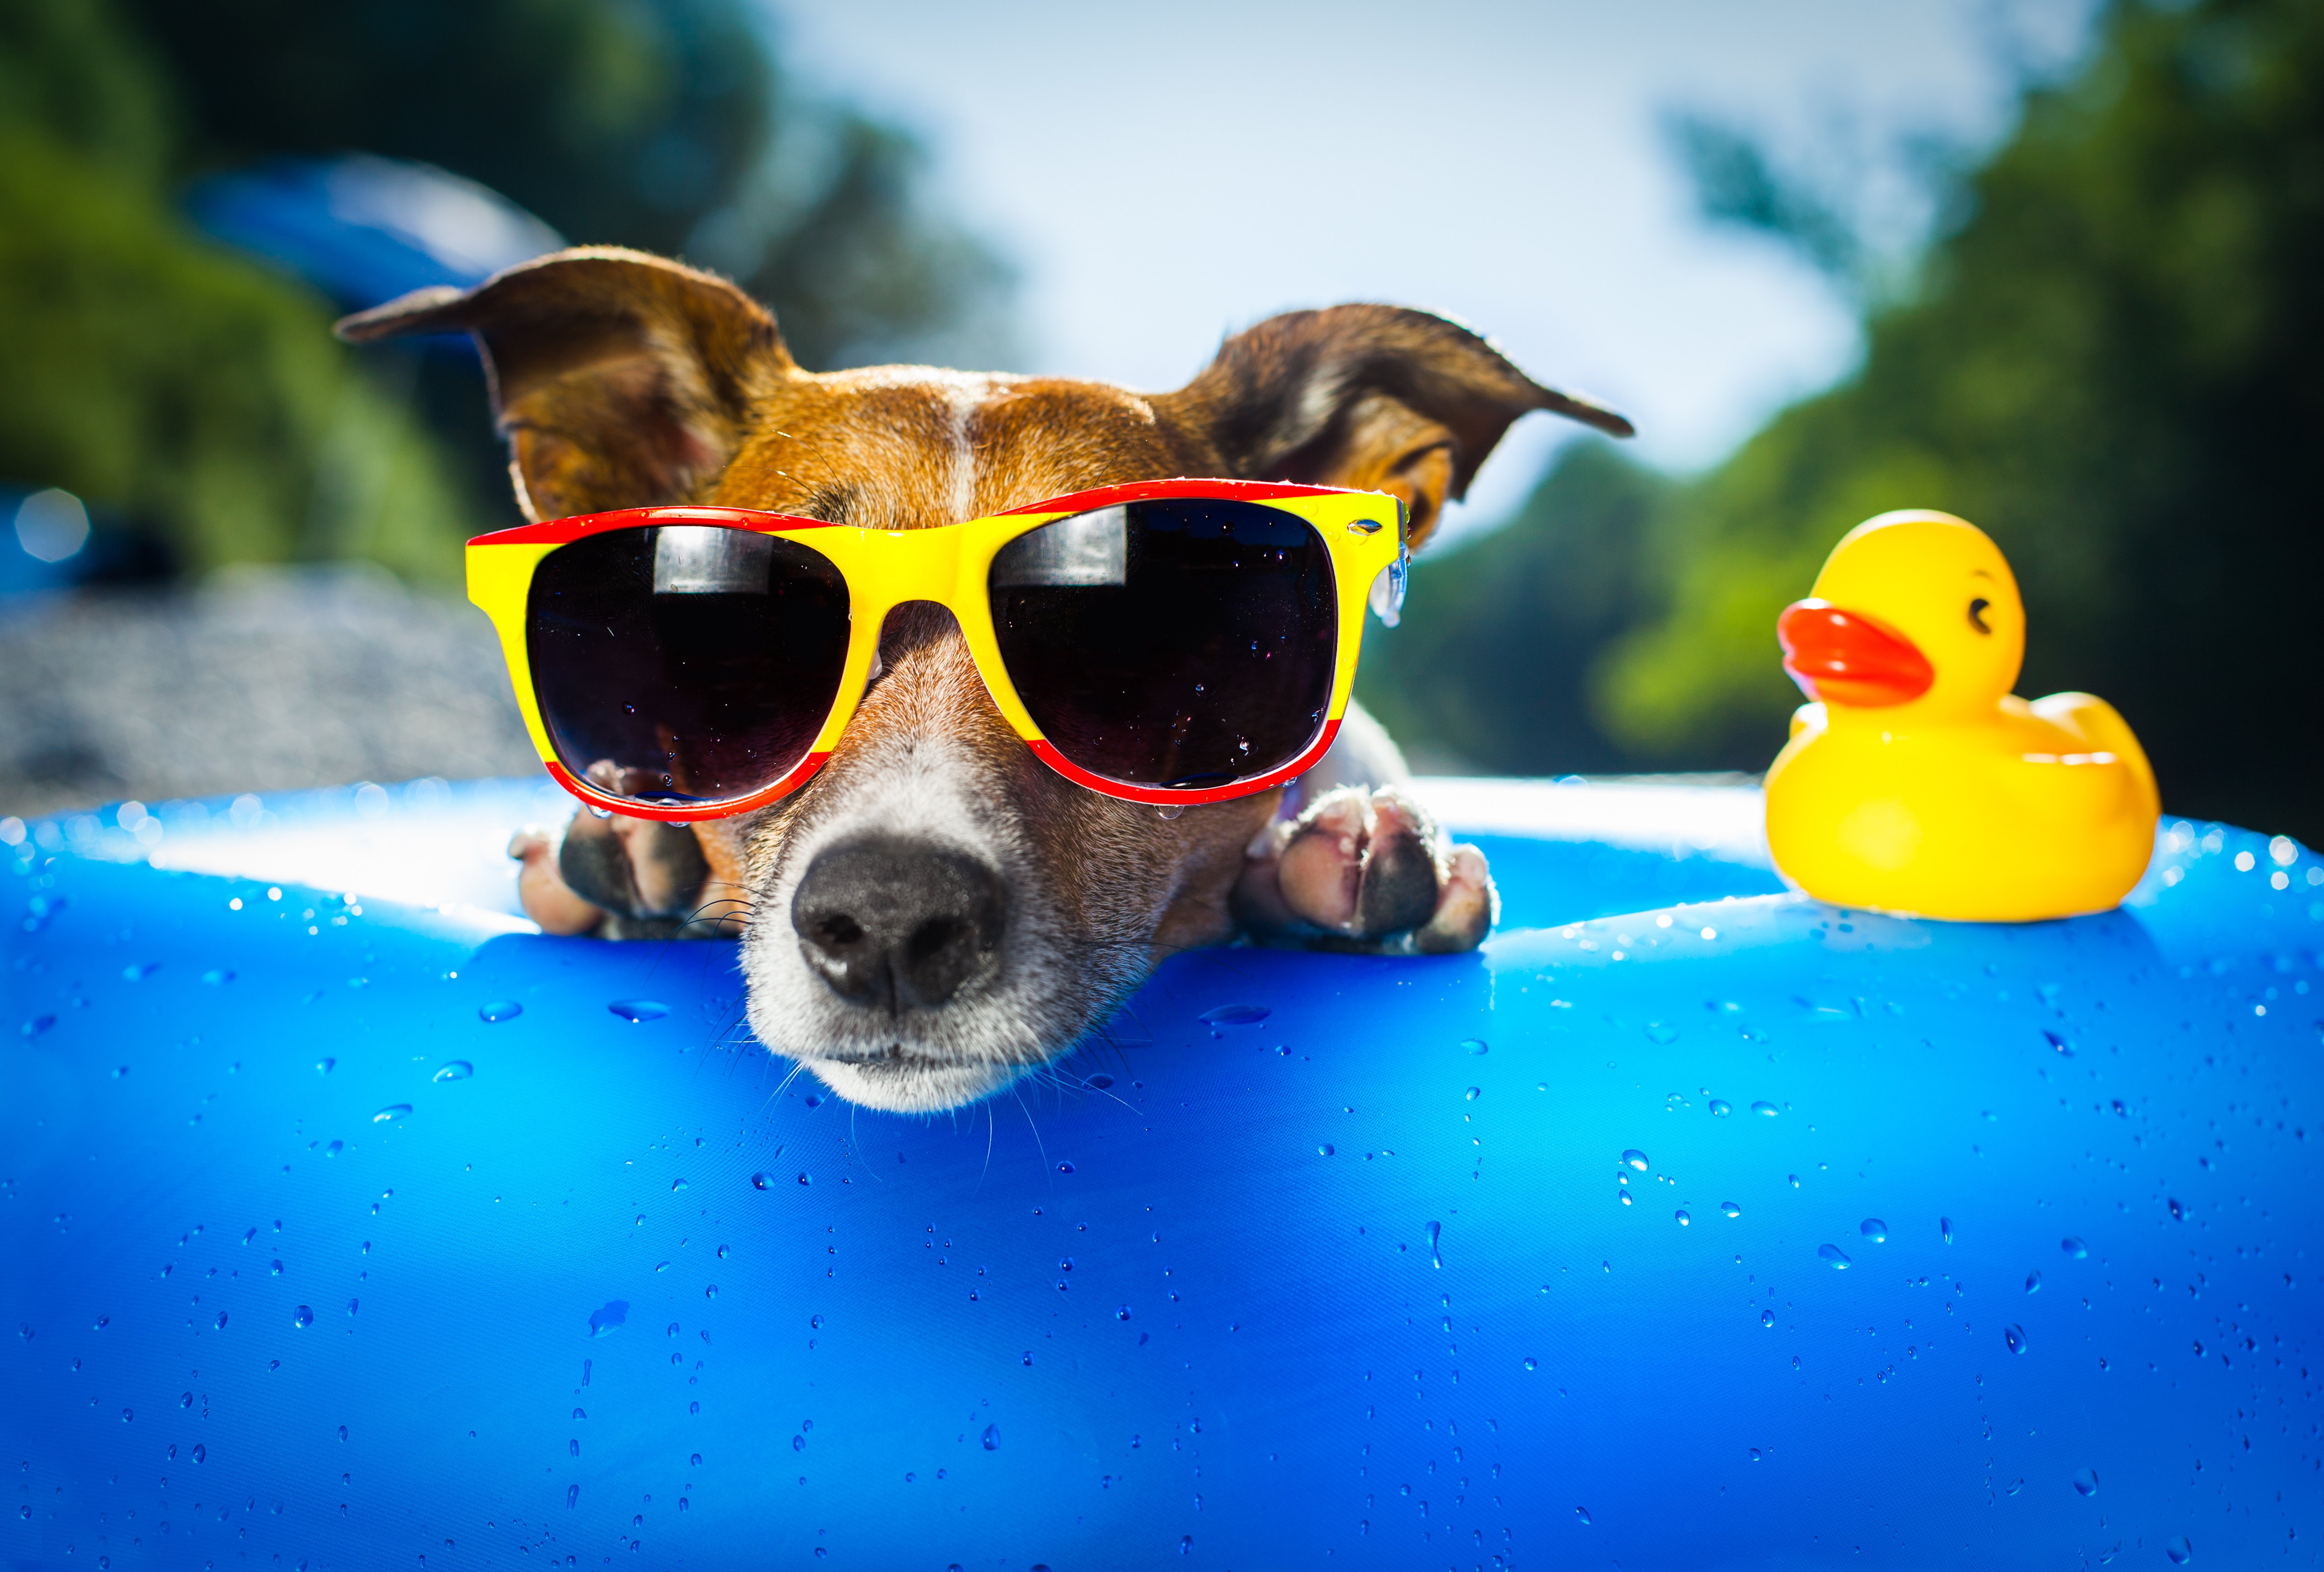 Funny duck toy and dog sunglasses  Wallpaper